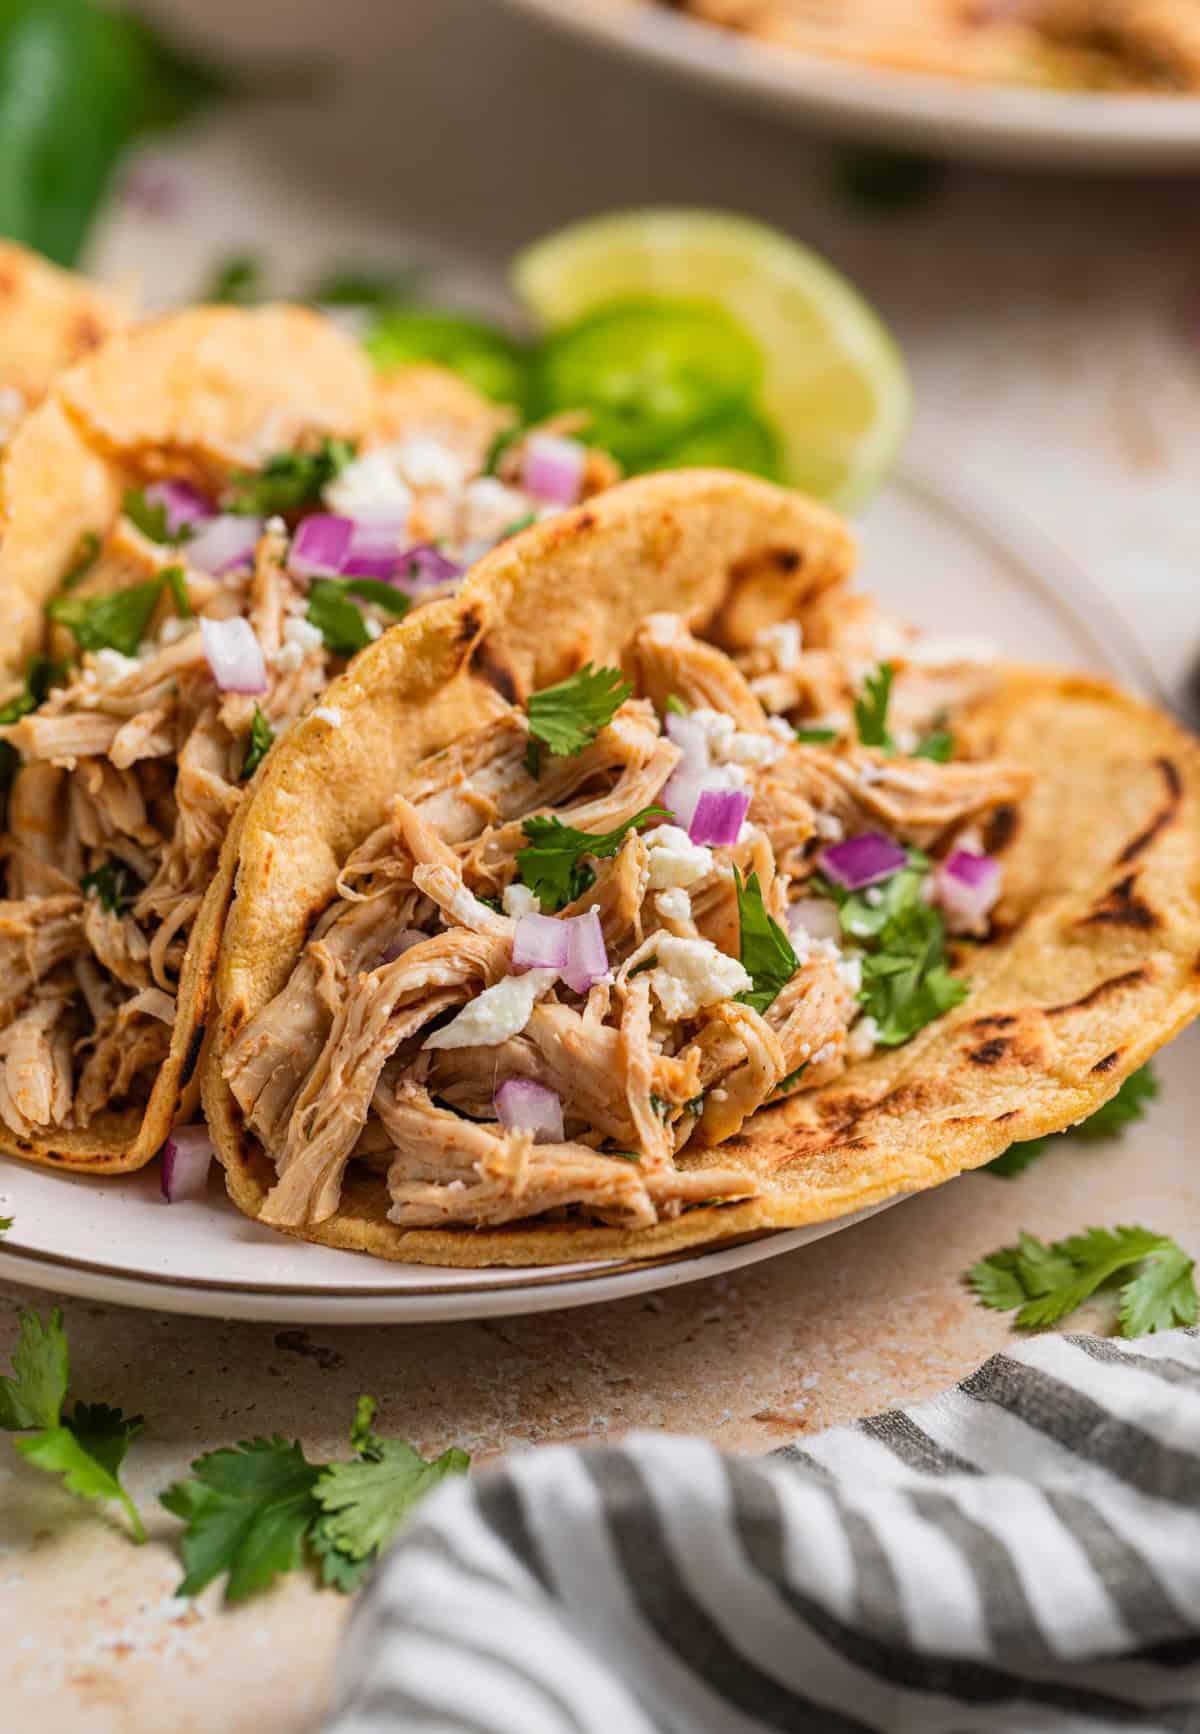 Instant pot shredded chicken tacos in charred corn tortillas topped with onion, cheese and cilantro.